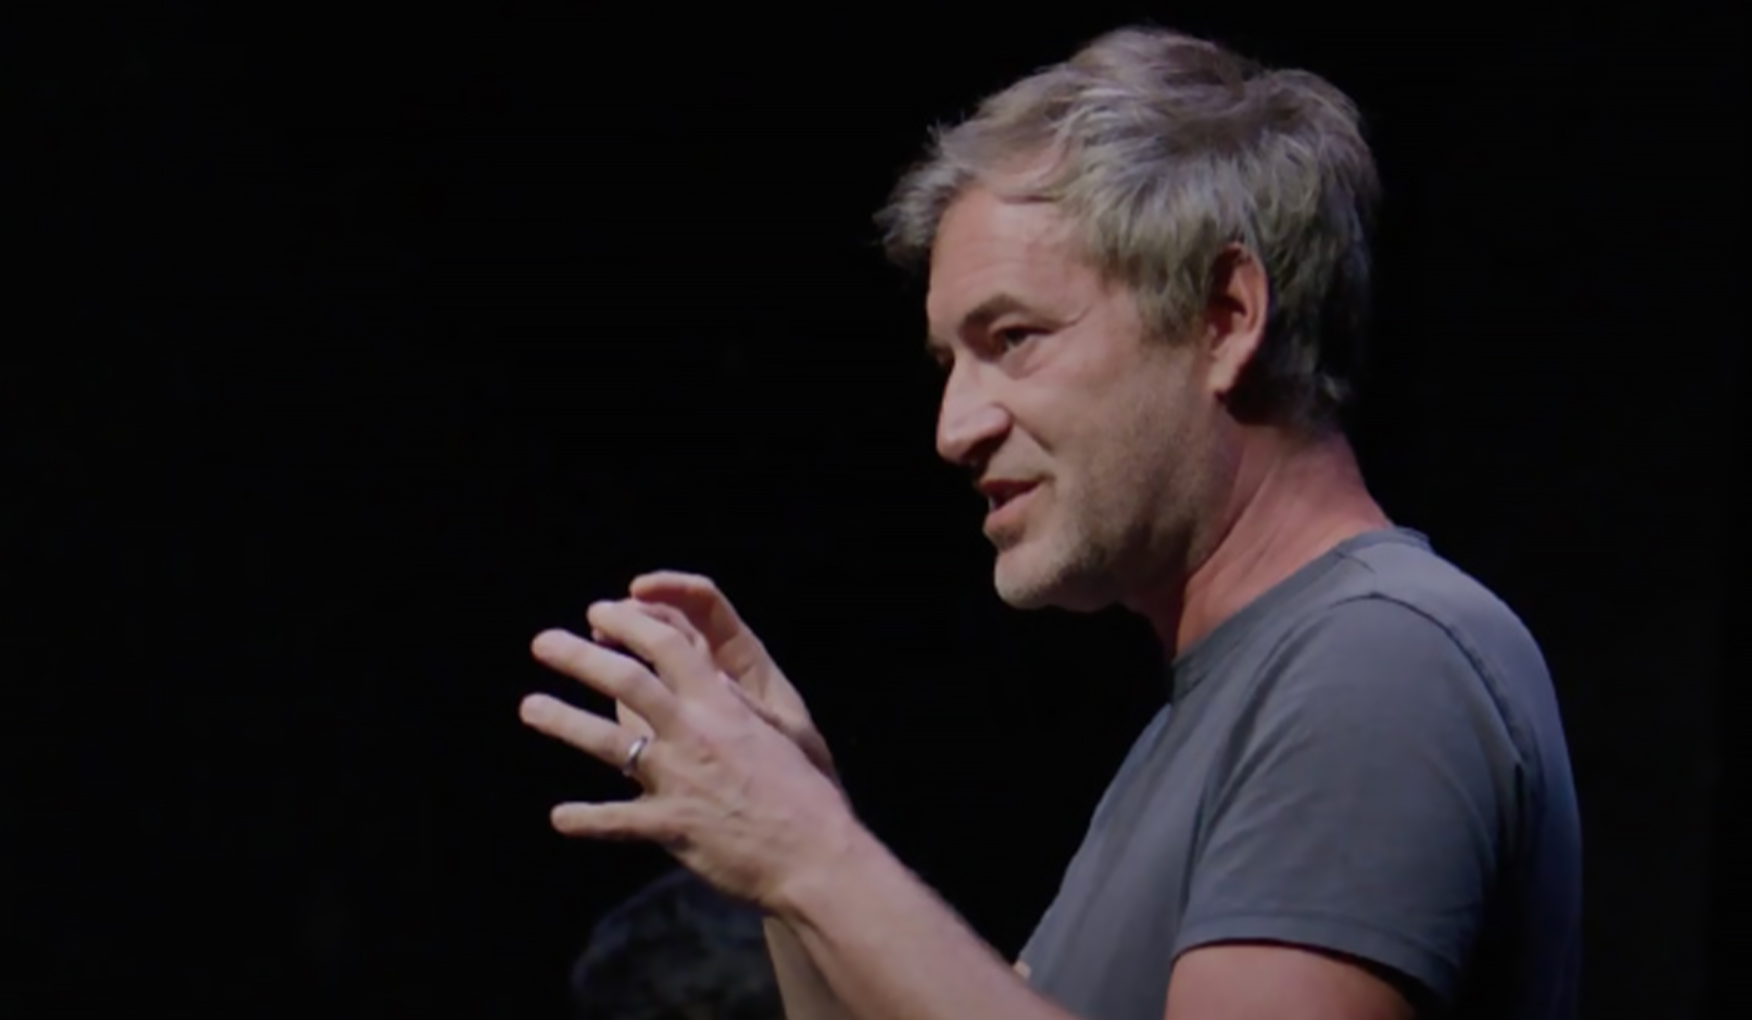 Mark Duplass speaks and gestures with his hands on stage, set against a dark theater setting